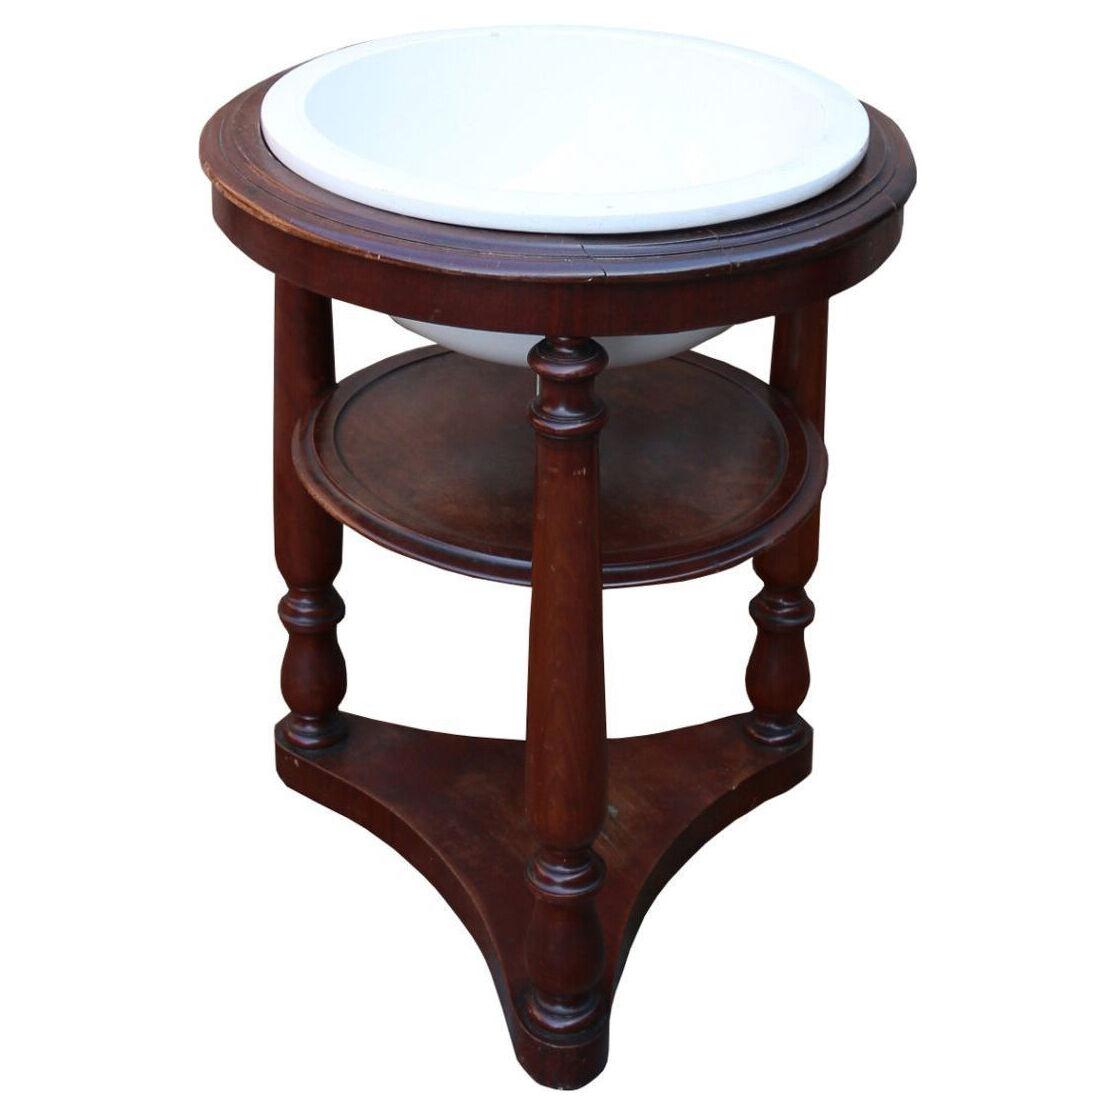 An Antique Sink or Basin with Mahogany Stand